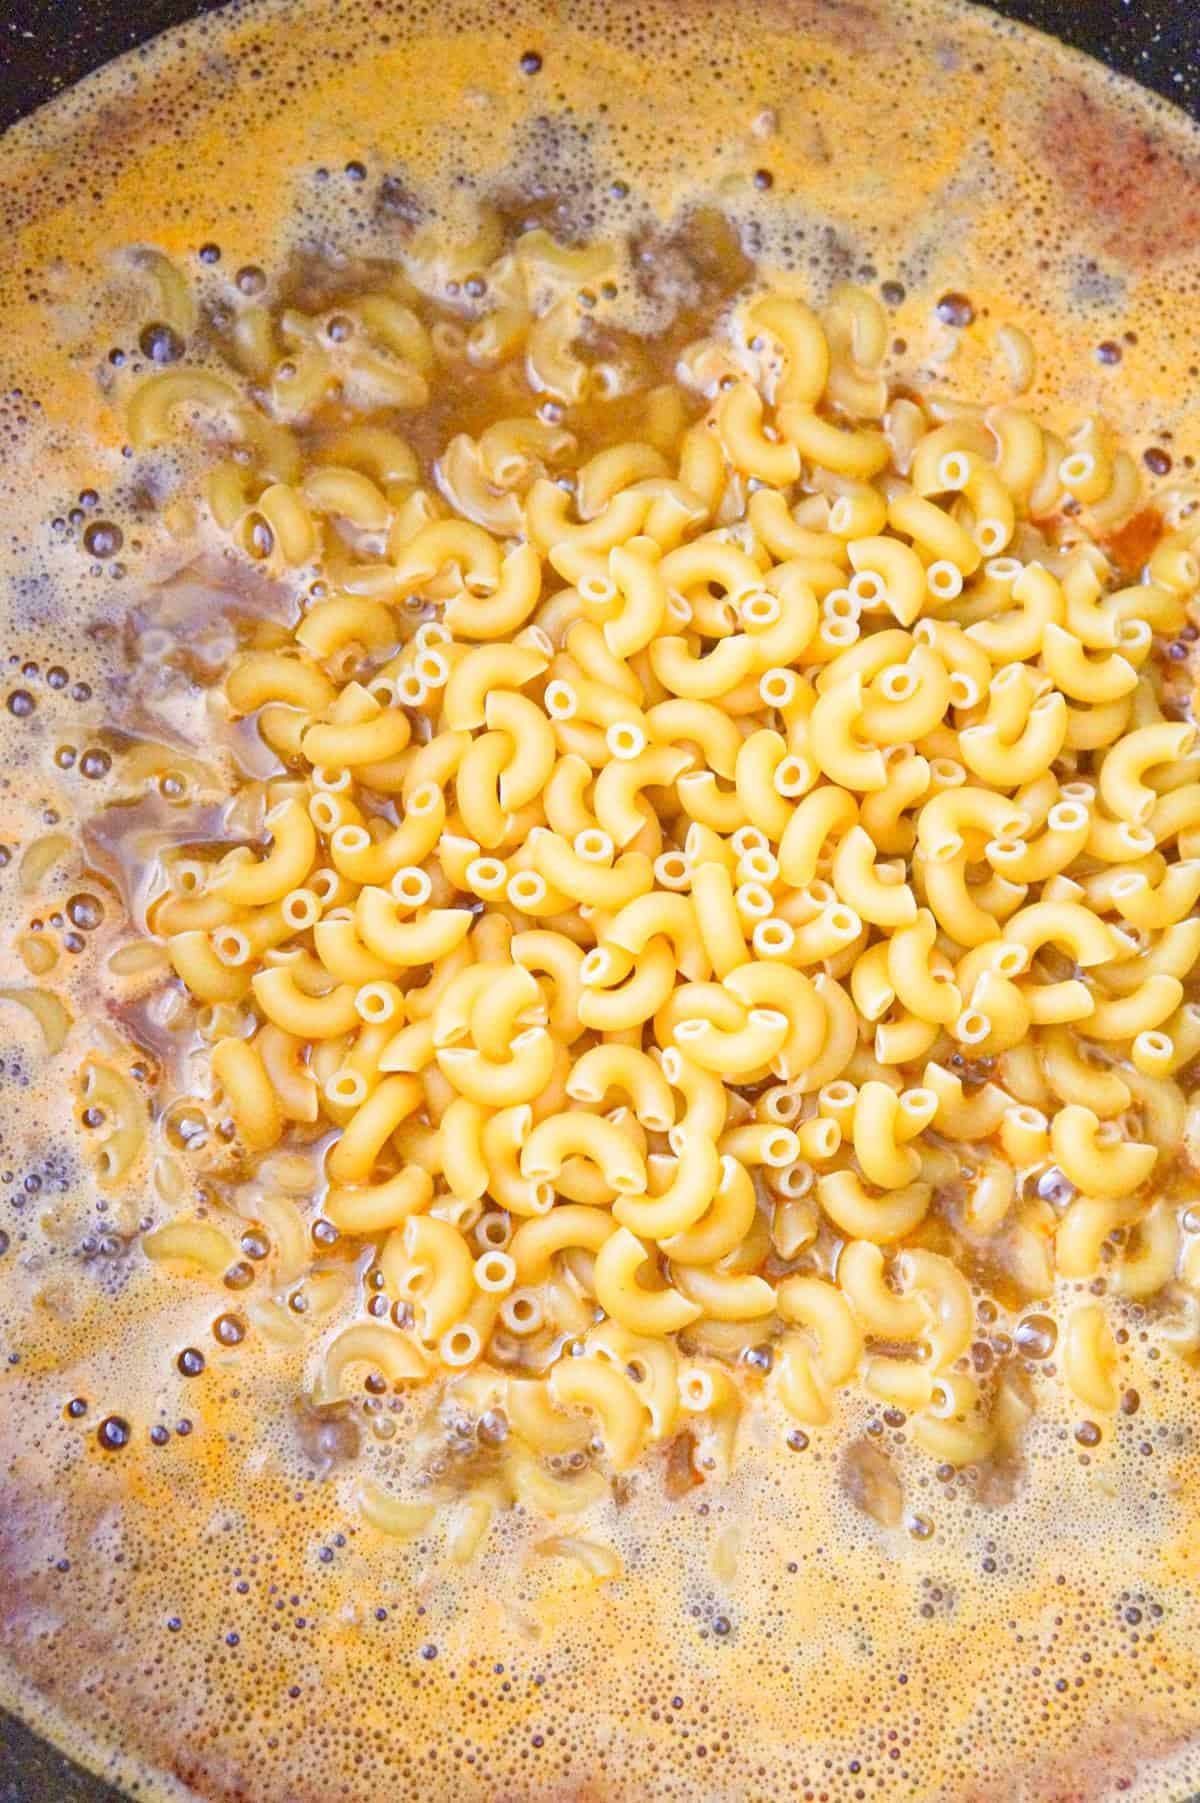 uncooked macaroni noodles on top of water, chili seasoning and ground beef in a large pot